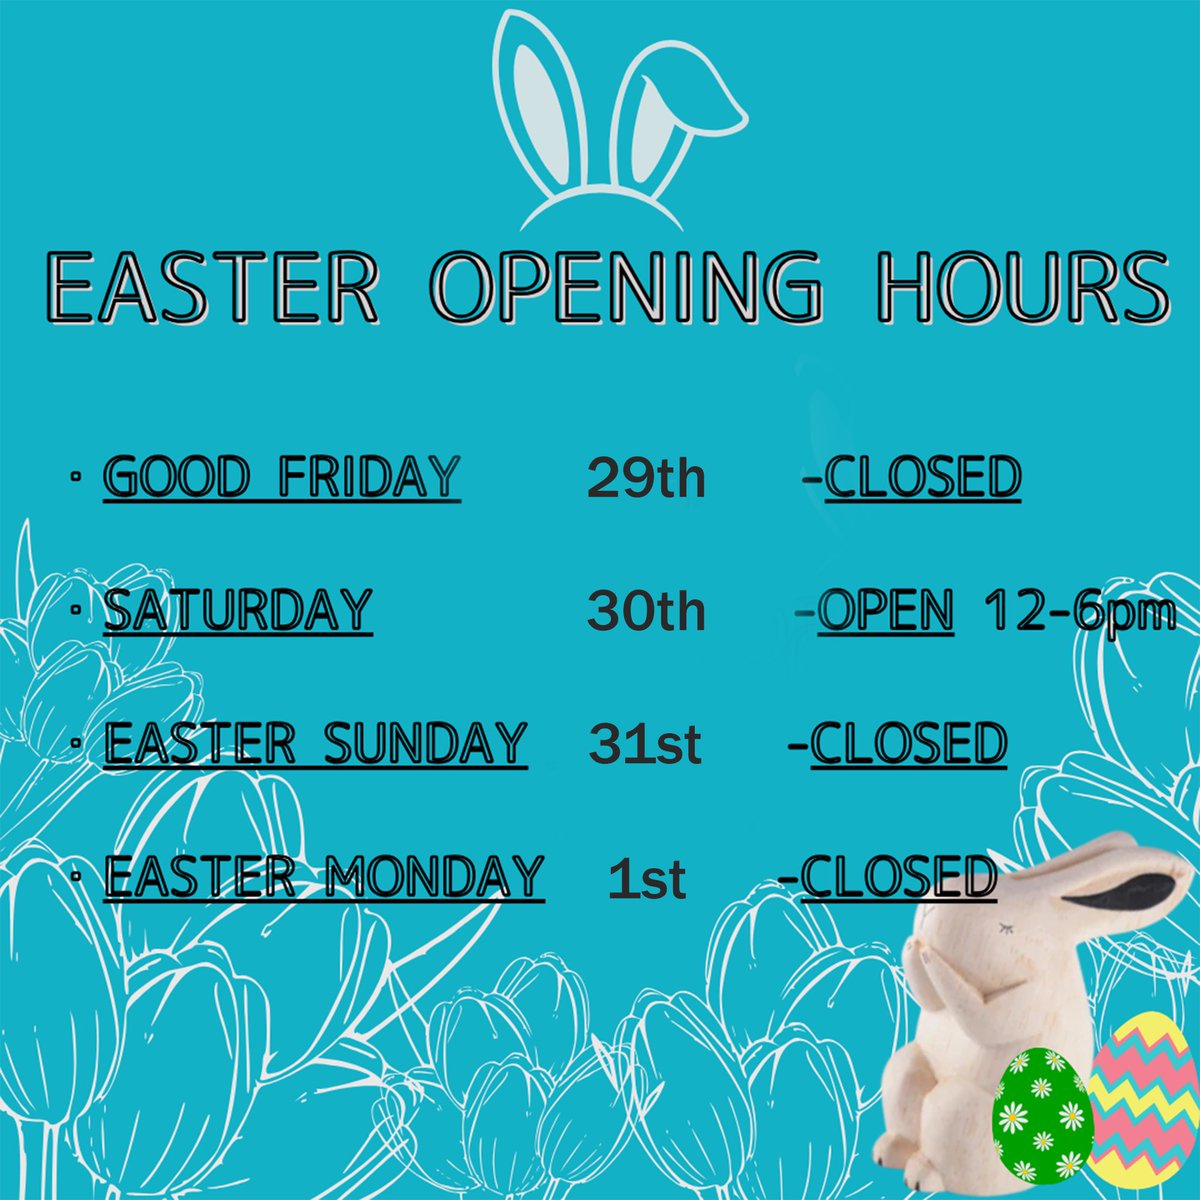 -EASTER OPENING HOURS- Just to let you know we will be closed on Good Friday, Sunday, and Easter Monday, however, OPEN AS NORMAL this Saturday!🐣 #swaygallery #swaygallerylondon #swaylondon #japan #london #japaninlondon #easterholidays #easteropeninghours